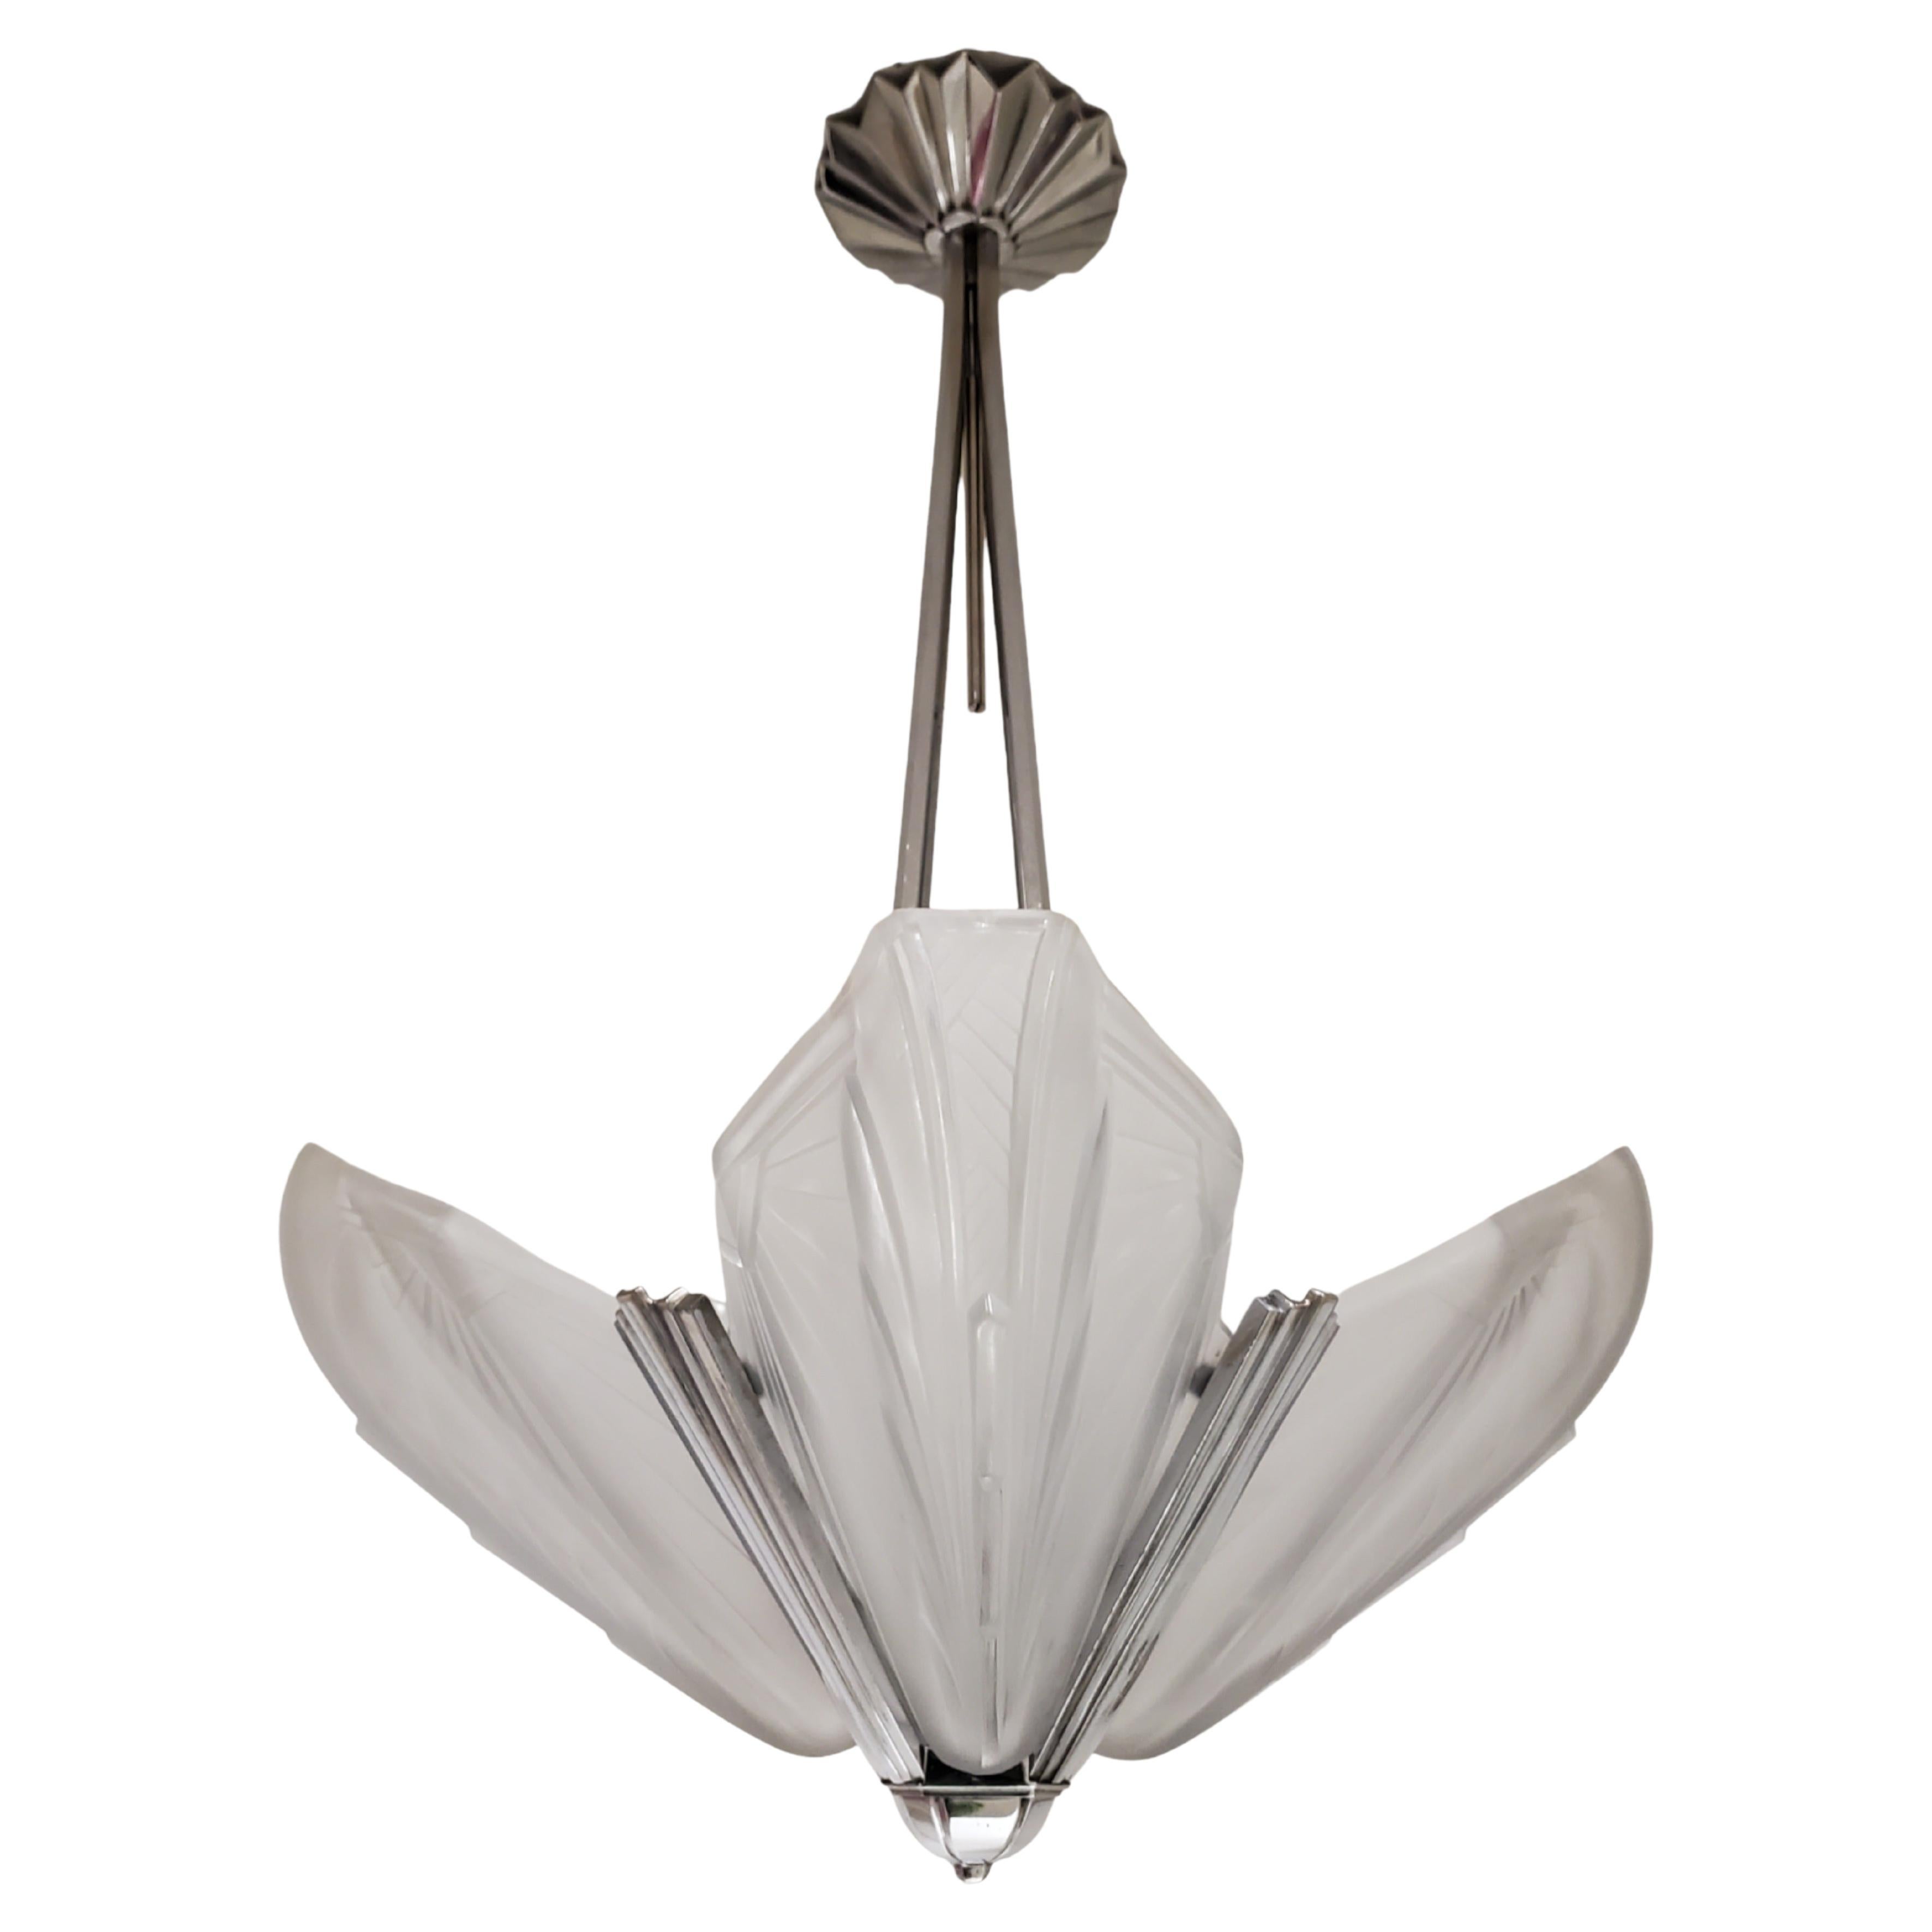 A striking and original French Art Deco period chandelier signed: EJG France featuring a highly stylized blossom design with four petal shape frosted art glass panels, each having a sunray motif and detailed geometric patterns. 
The frosted art